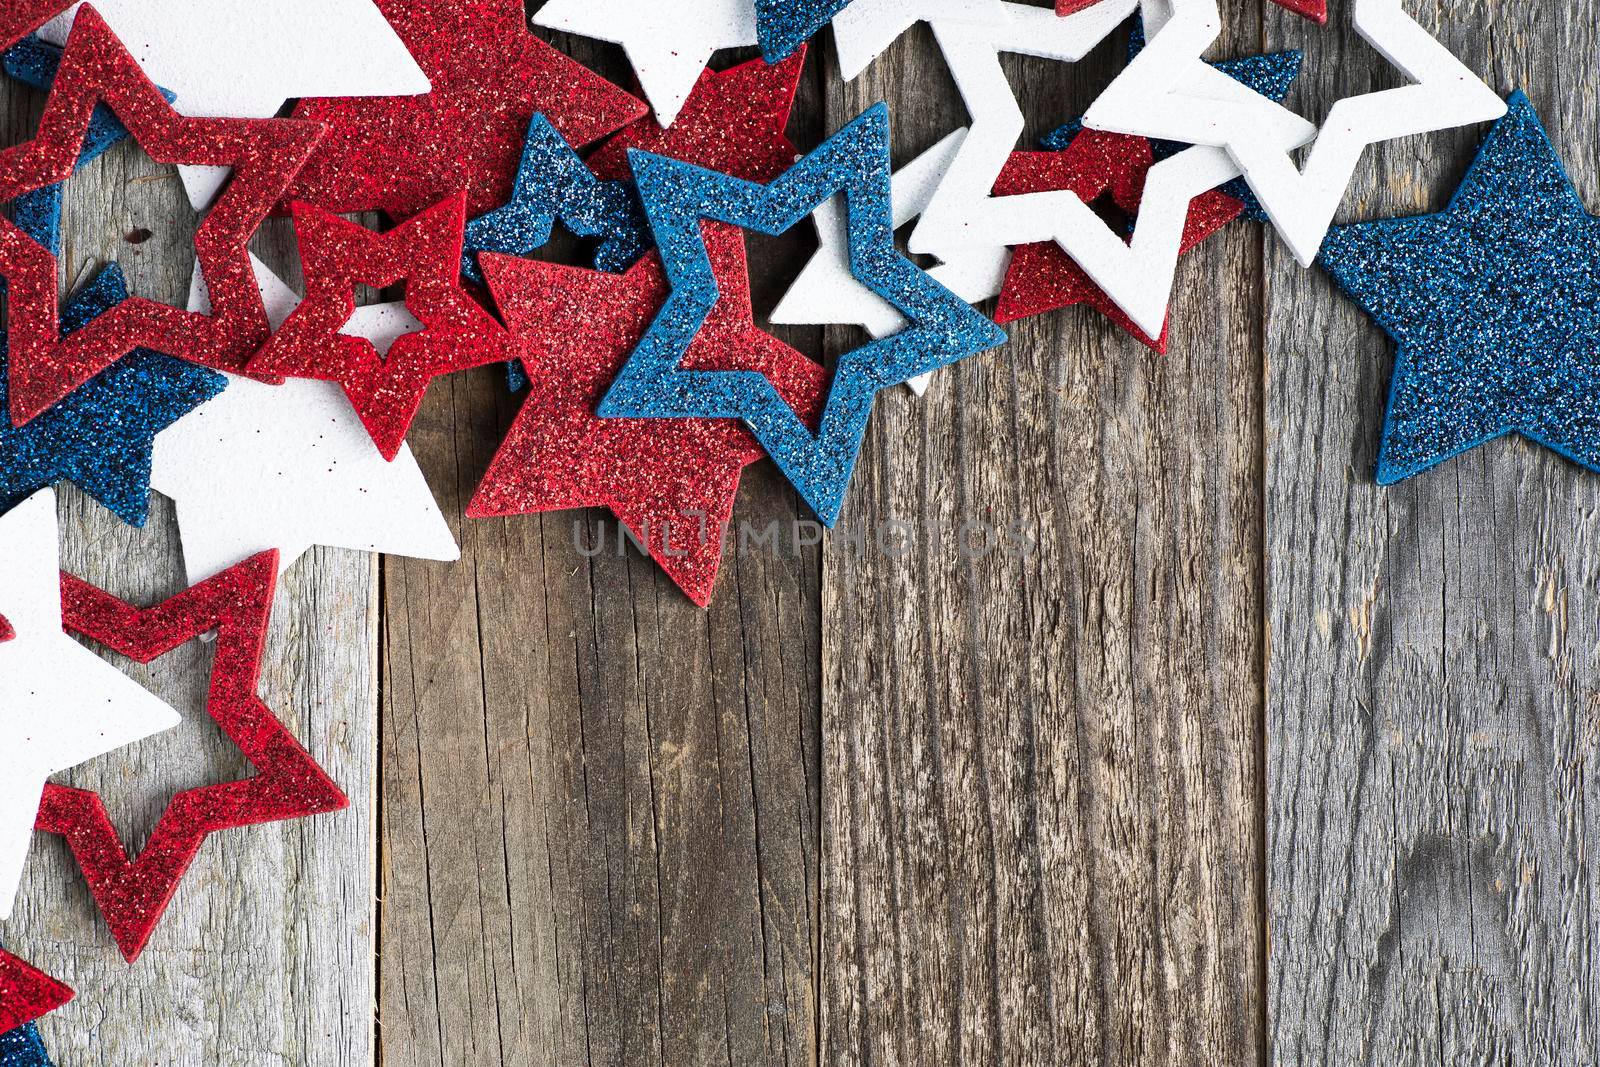 Red white and blue glittery star decorations on wooden surface with copy space.